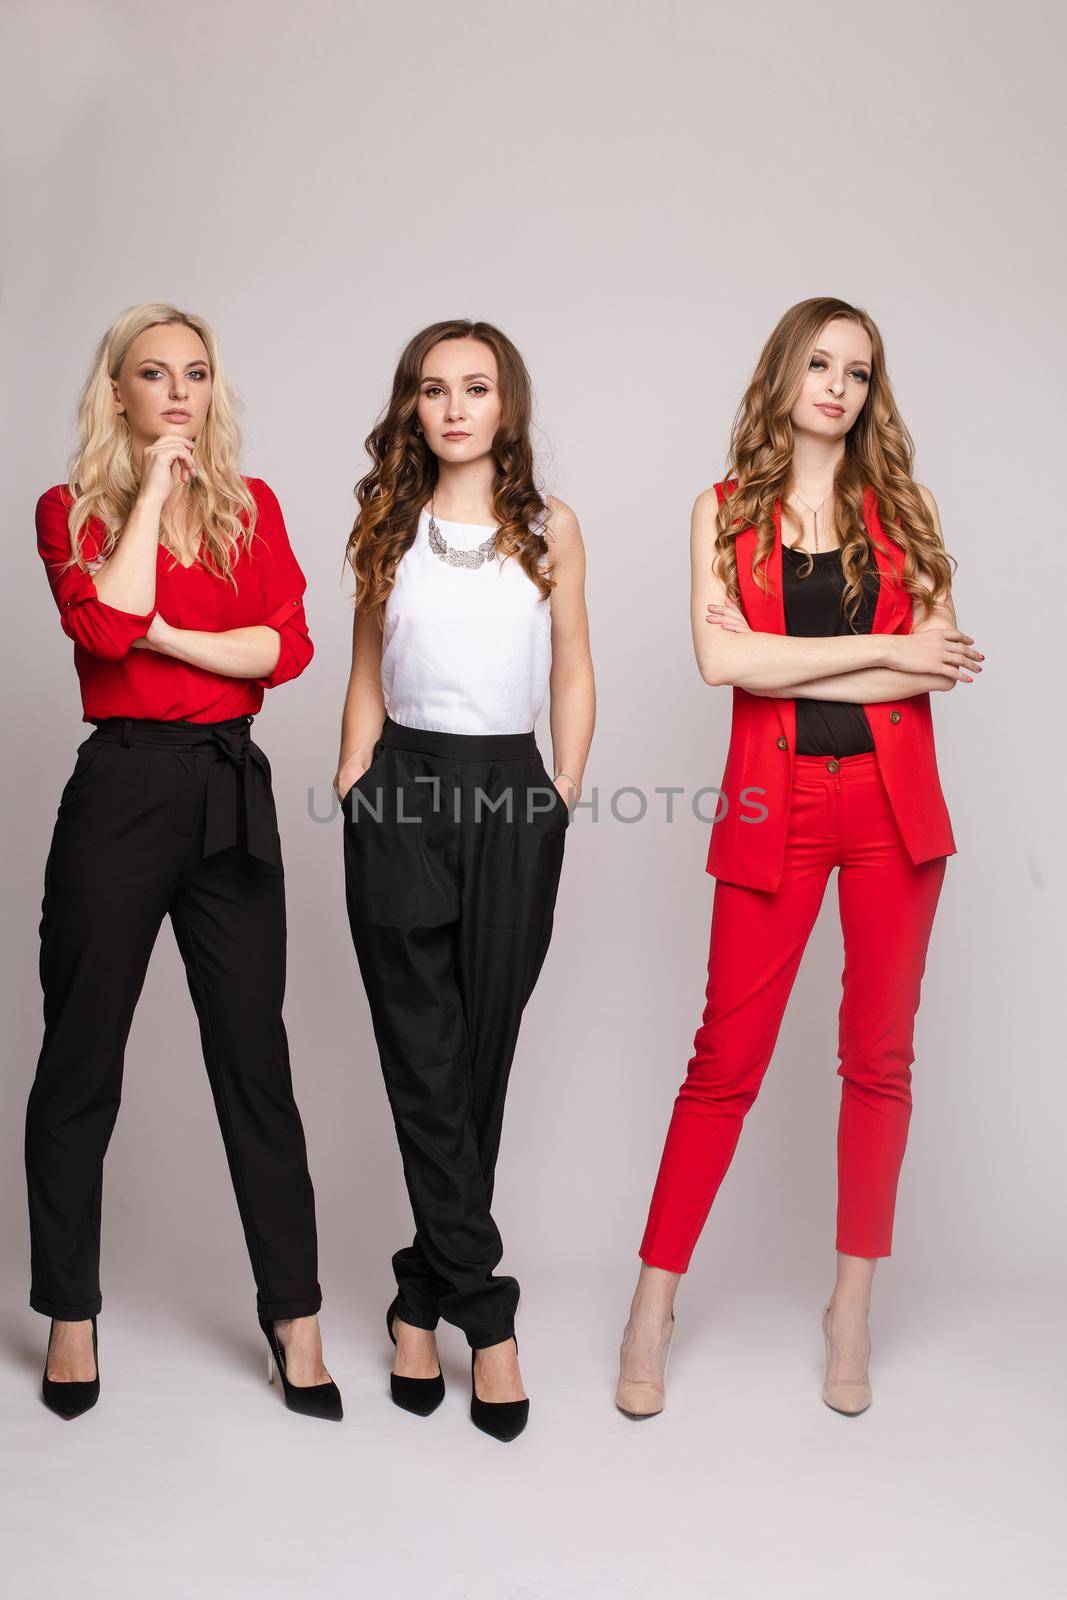 Three gorgeous elegant young women in casual clothe by StudioLucky